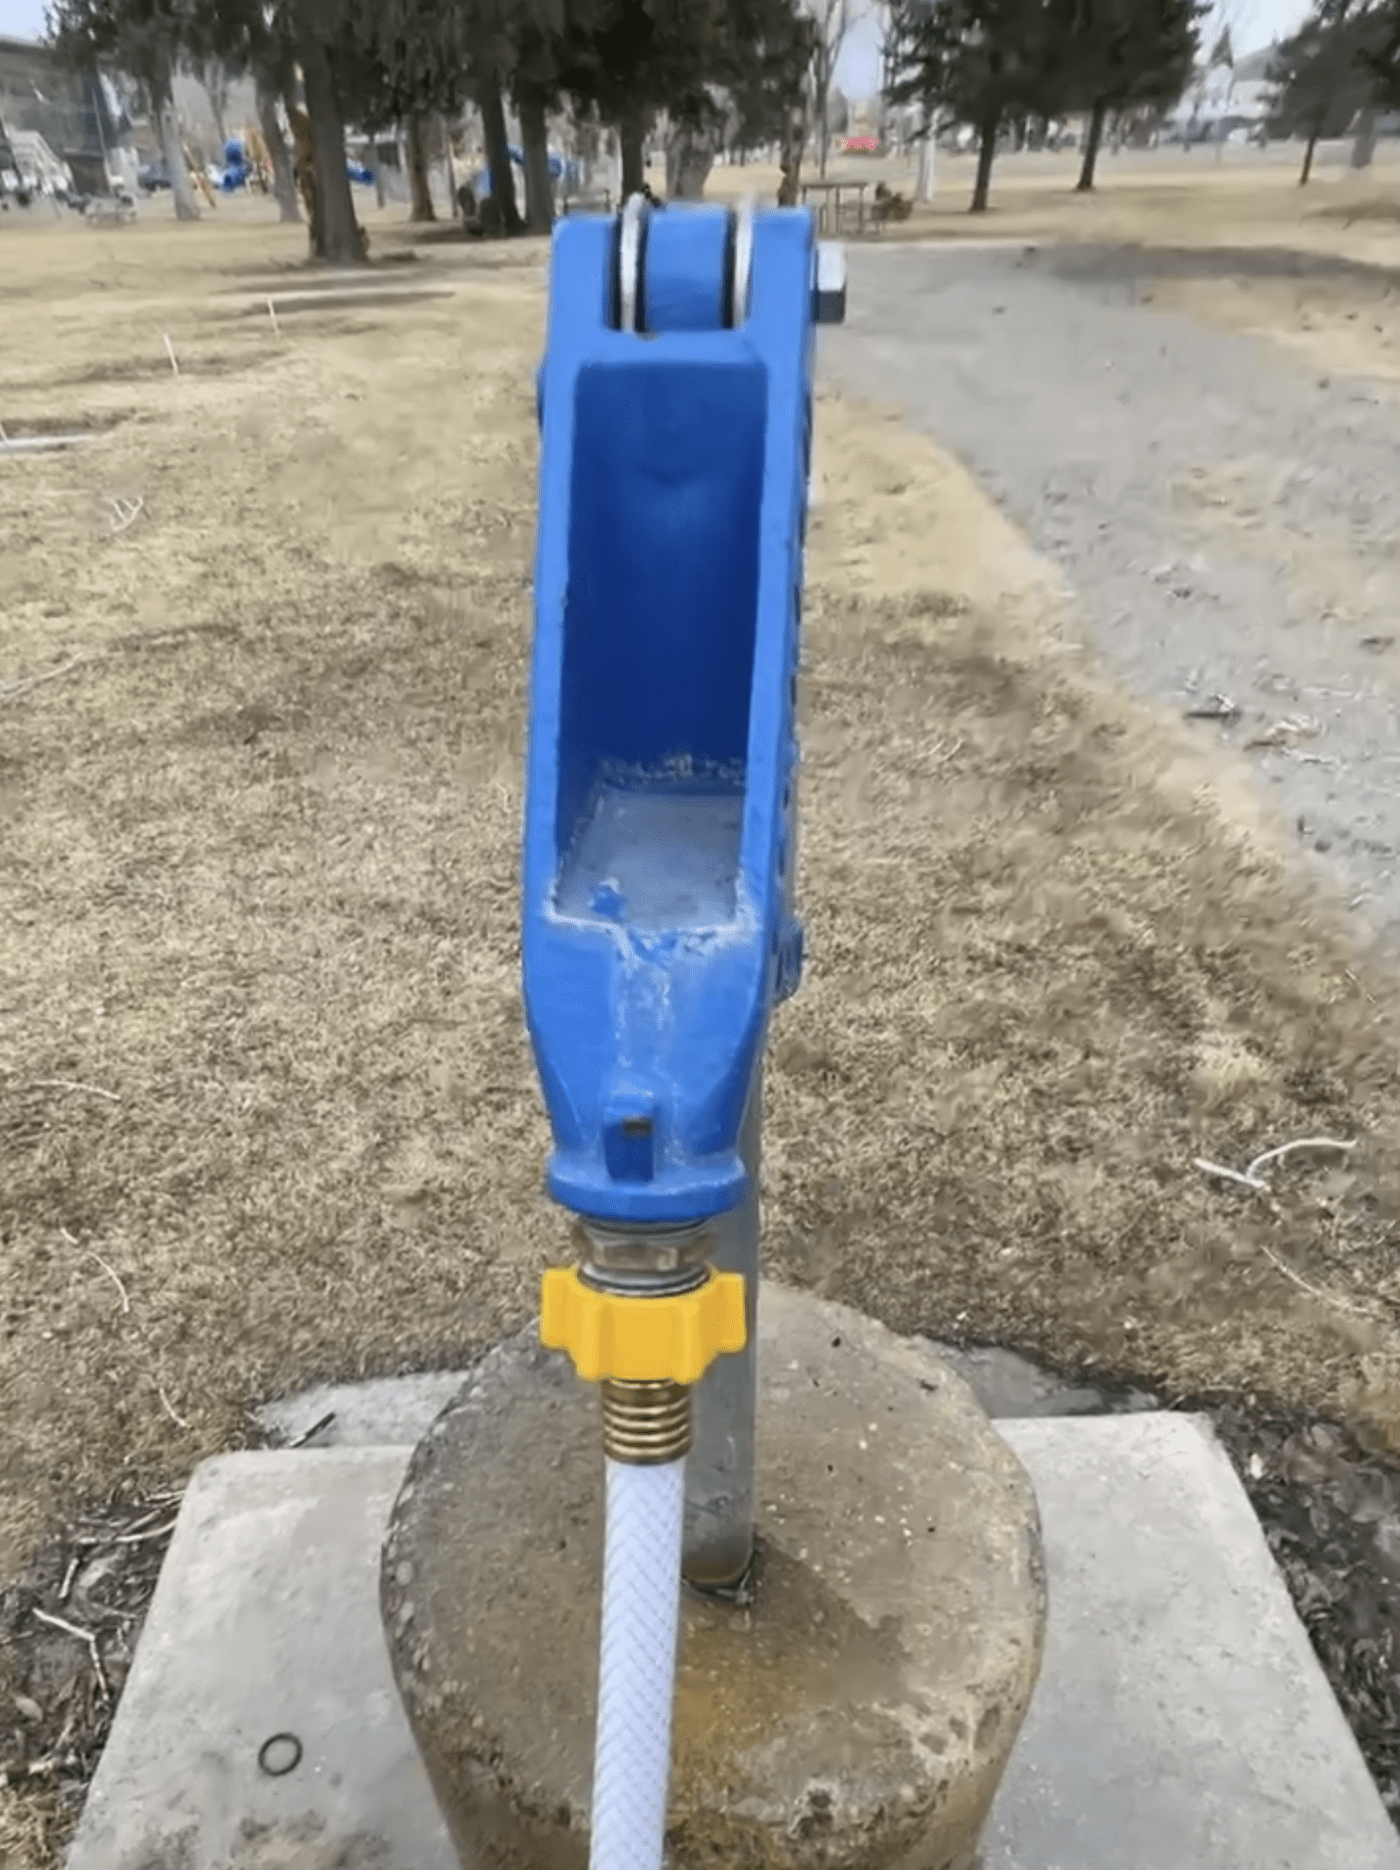 spigot connected to hose